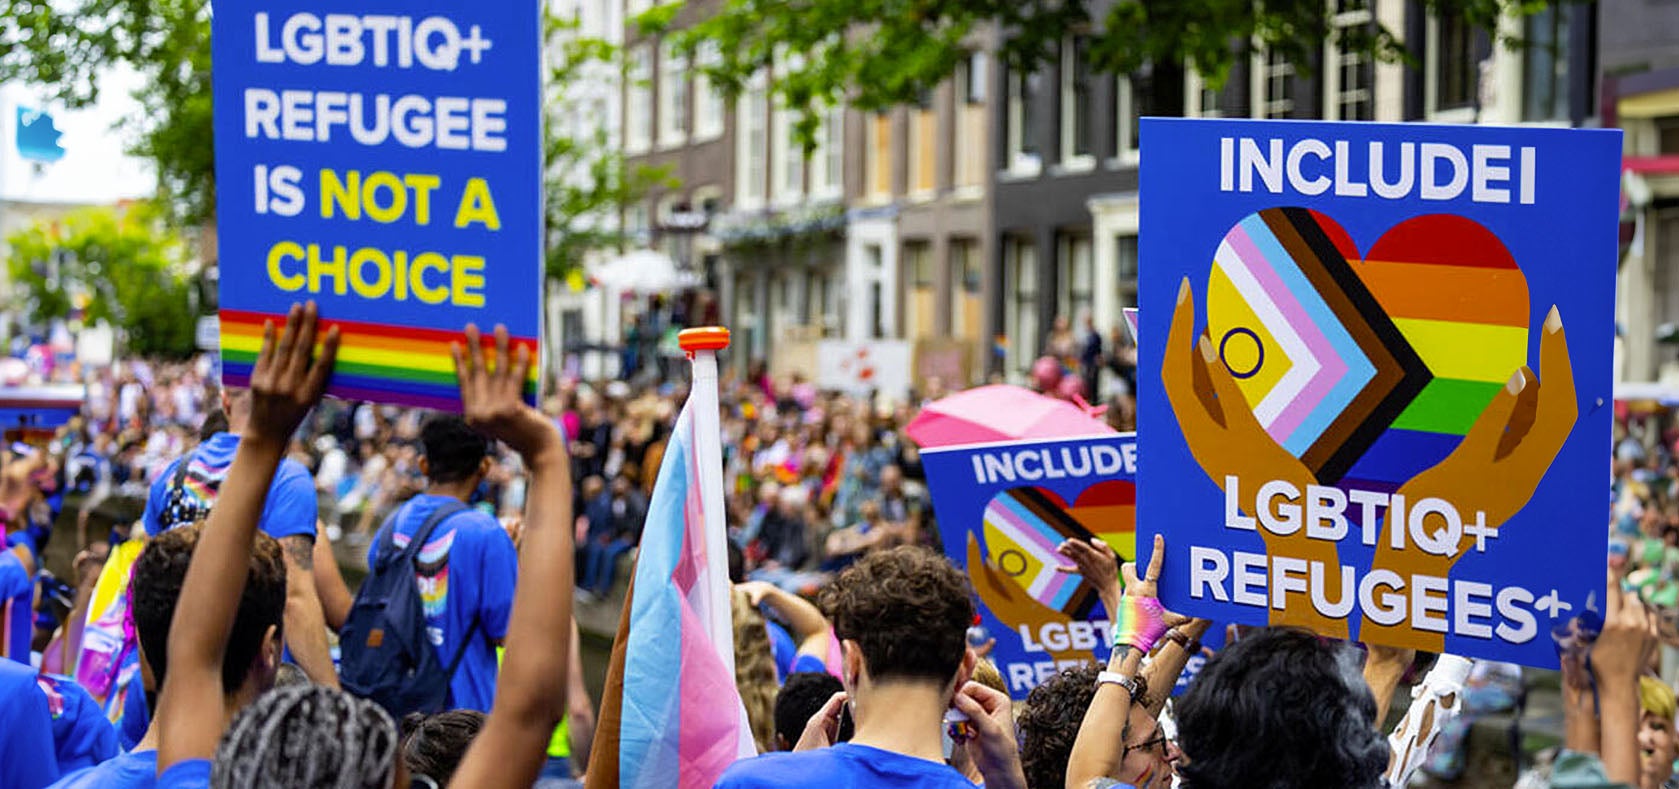 LGBTIQ+ refugees and asylum seekers from all over the world celebrate Pride on UNHCR’s boat during the Canal Parade of Pride Amsterdam. Photo: UNHCR/Tim Mai Tan